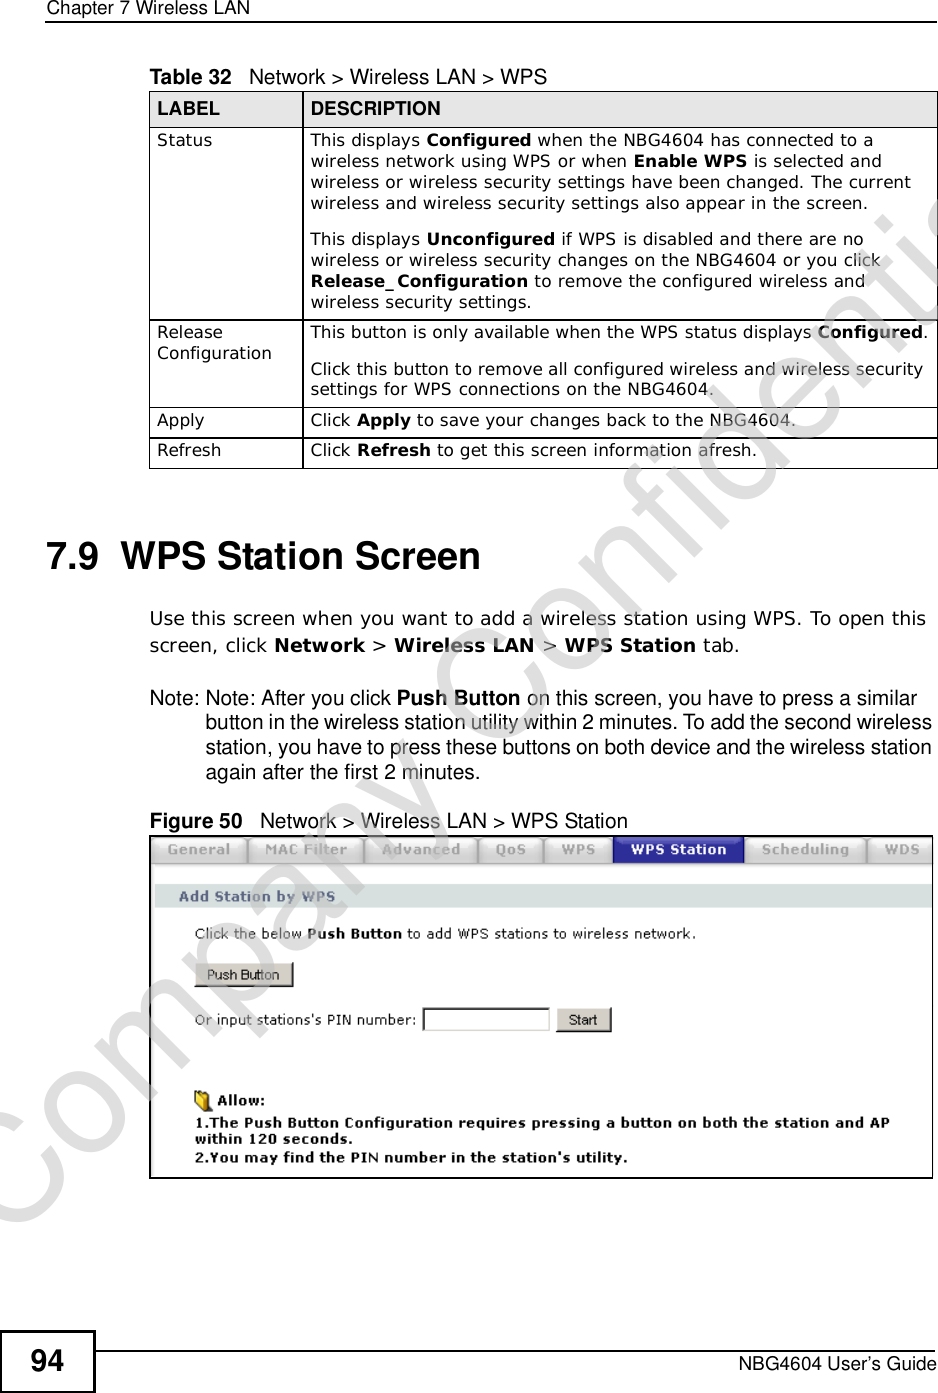 Chapter 7Wireless LANNBG4604 User’s Guide947.9  WPS Station ScreenUse this screen when you want to add a wireless station using WPS. To open this screen, click Network &gt; Wireless LAN &gt; WPS Station tab.Note: Note: After you click Push Button on this screen, you have to press a similar button in the wireless station utility within 2 minutes. To add the second wireless station, you have to press these buttons on both device and the wireless station again after the first 2 minutes.Figure 50   Network &gt; Wireless LAN &gt; WPS StationStatus This displays Configured when the NBG4604 has connected to a wireless network using WPS or when Enable WPS is selected and wireless or wireless security settings have been changed. The current wireless and wireless security settings also appear in the screen.This displays Unconfigured if WPS is disabled and there are no wireless or wireless security changes on the NBG4604 or you click Release_Configuration to remove the configured wireless and wireless security settings.Release Configuration This button is only available when the WPS status displays Configured.Click this button to remove all configured wireless and wireless security settings for WPS connections on the NBG4604.Apply Click Apply to save your changes back to the NBG4604.Refresh Click Refresh to get this screen information afresh.Table 32   Network &gt; Wireless LAN &gt; WPSLABEL DESCRIPTIONCompany Confidential